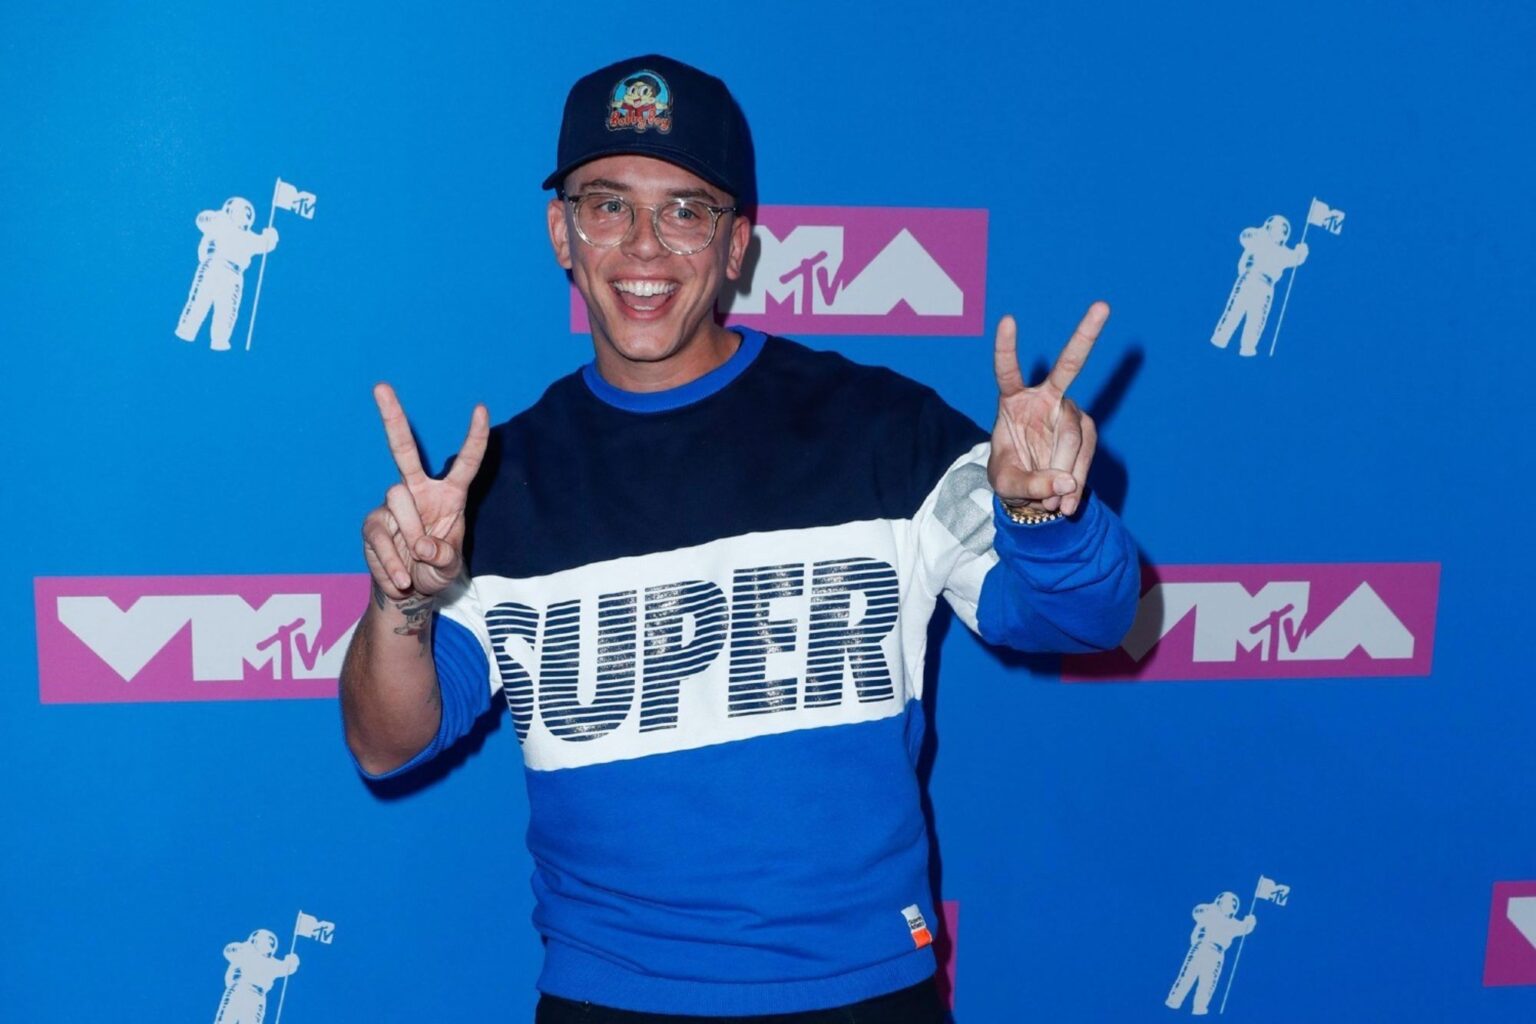 Star rapper Logic has invested millions of dollars in the crypto currency Bitcoin. Learn more about Logic's deal here.